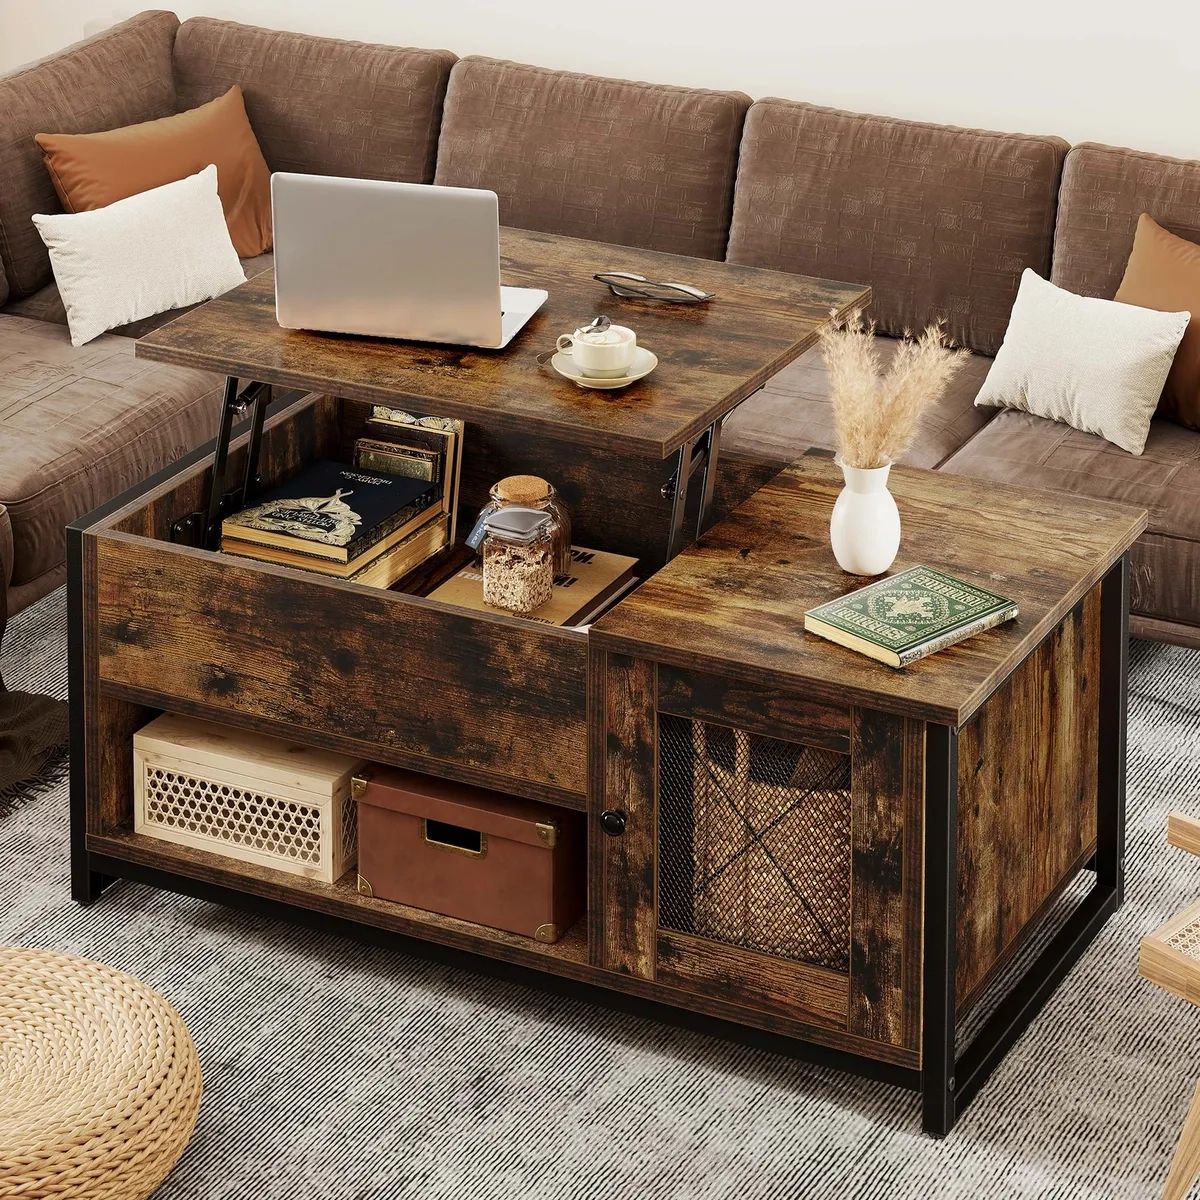 Farmhouse Lift Top Coffee Table With Hidden Compartment And Storage Shelf  Brown | Ebay Regarding Lift Top Coffee Tables With Storage (Photo 4 of 15)